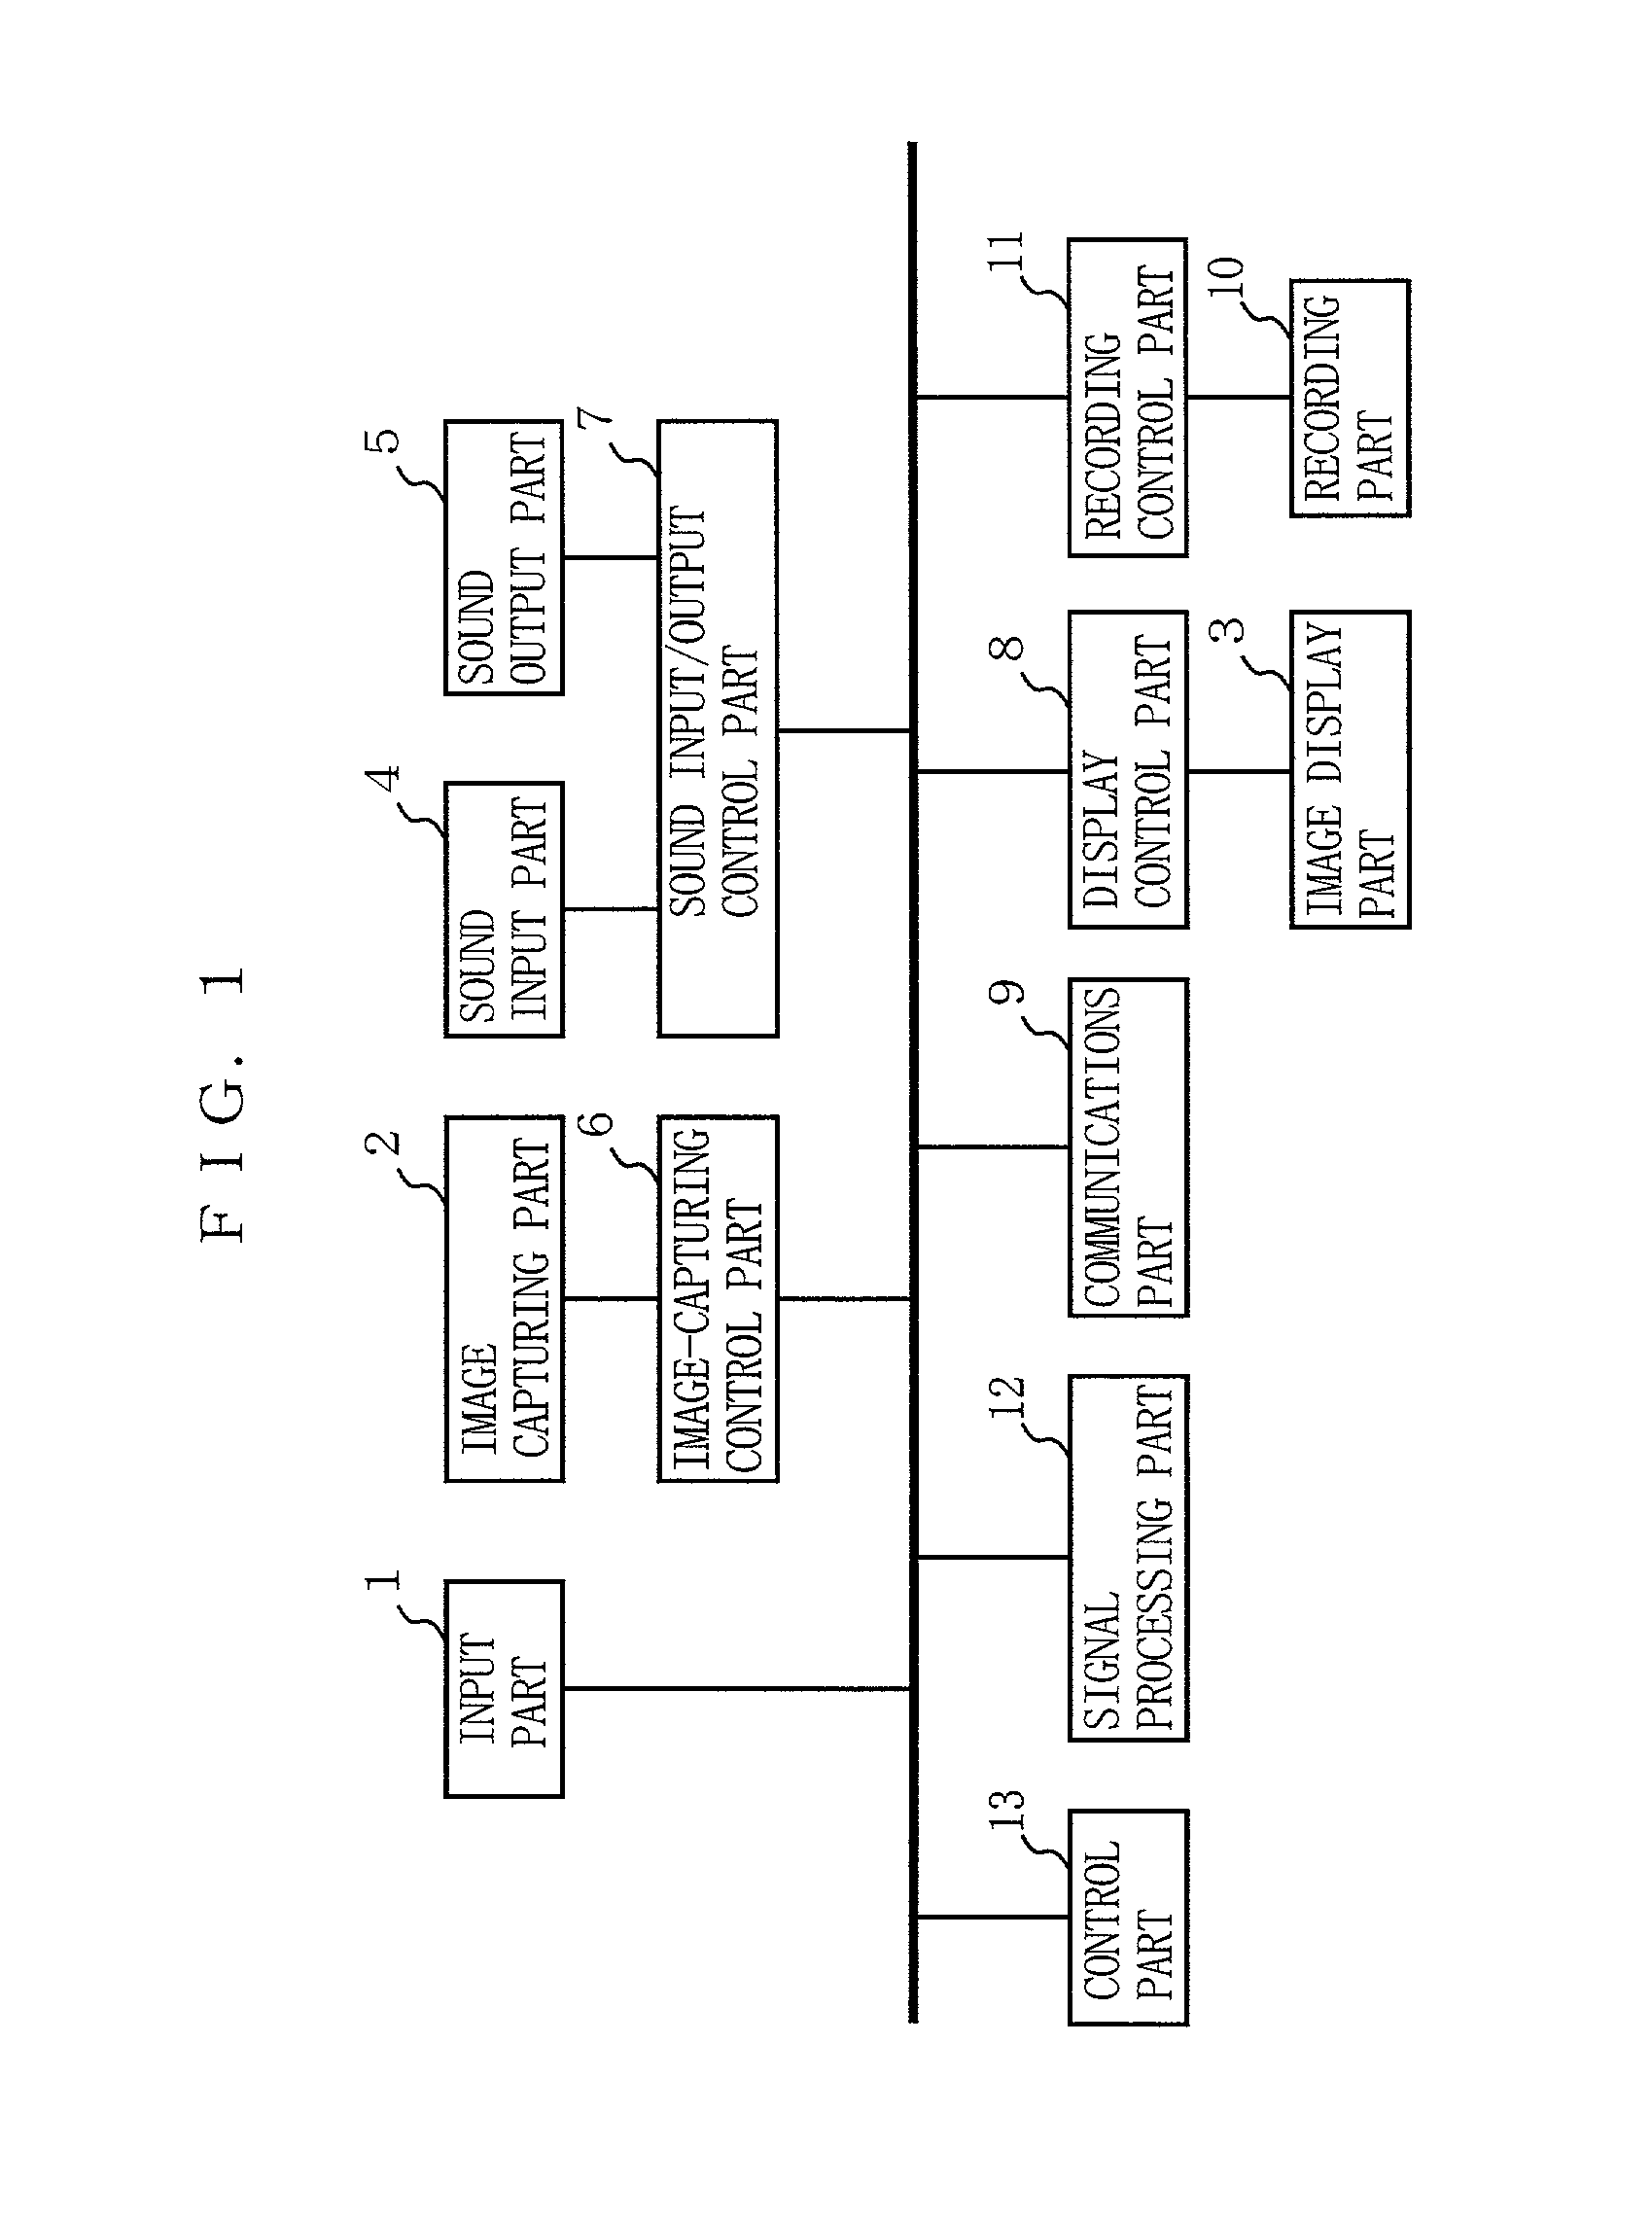 Method and device for media editing